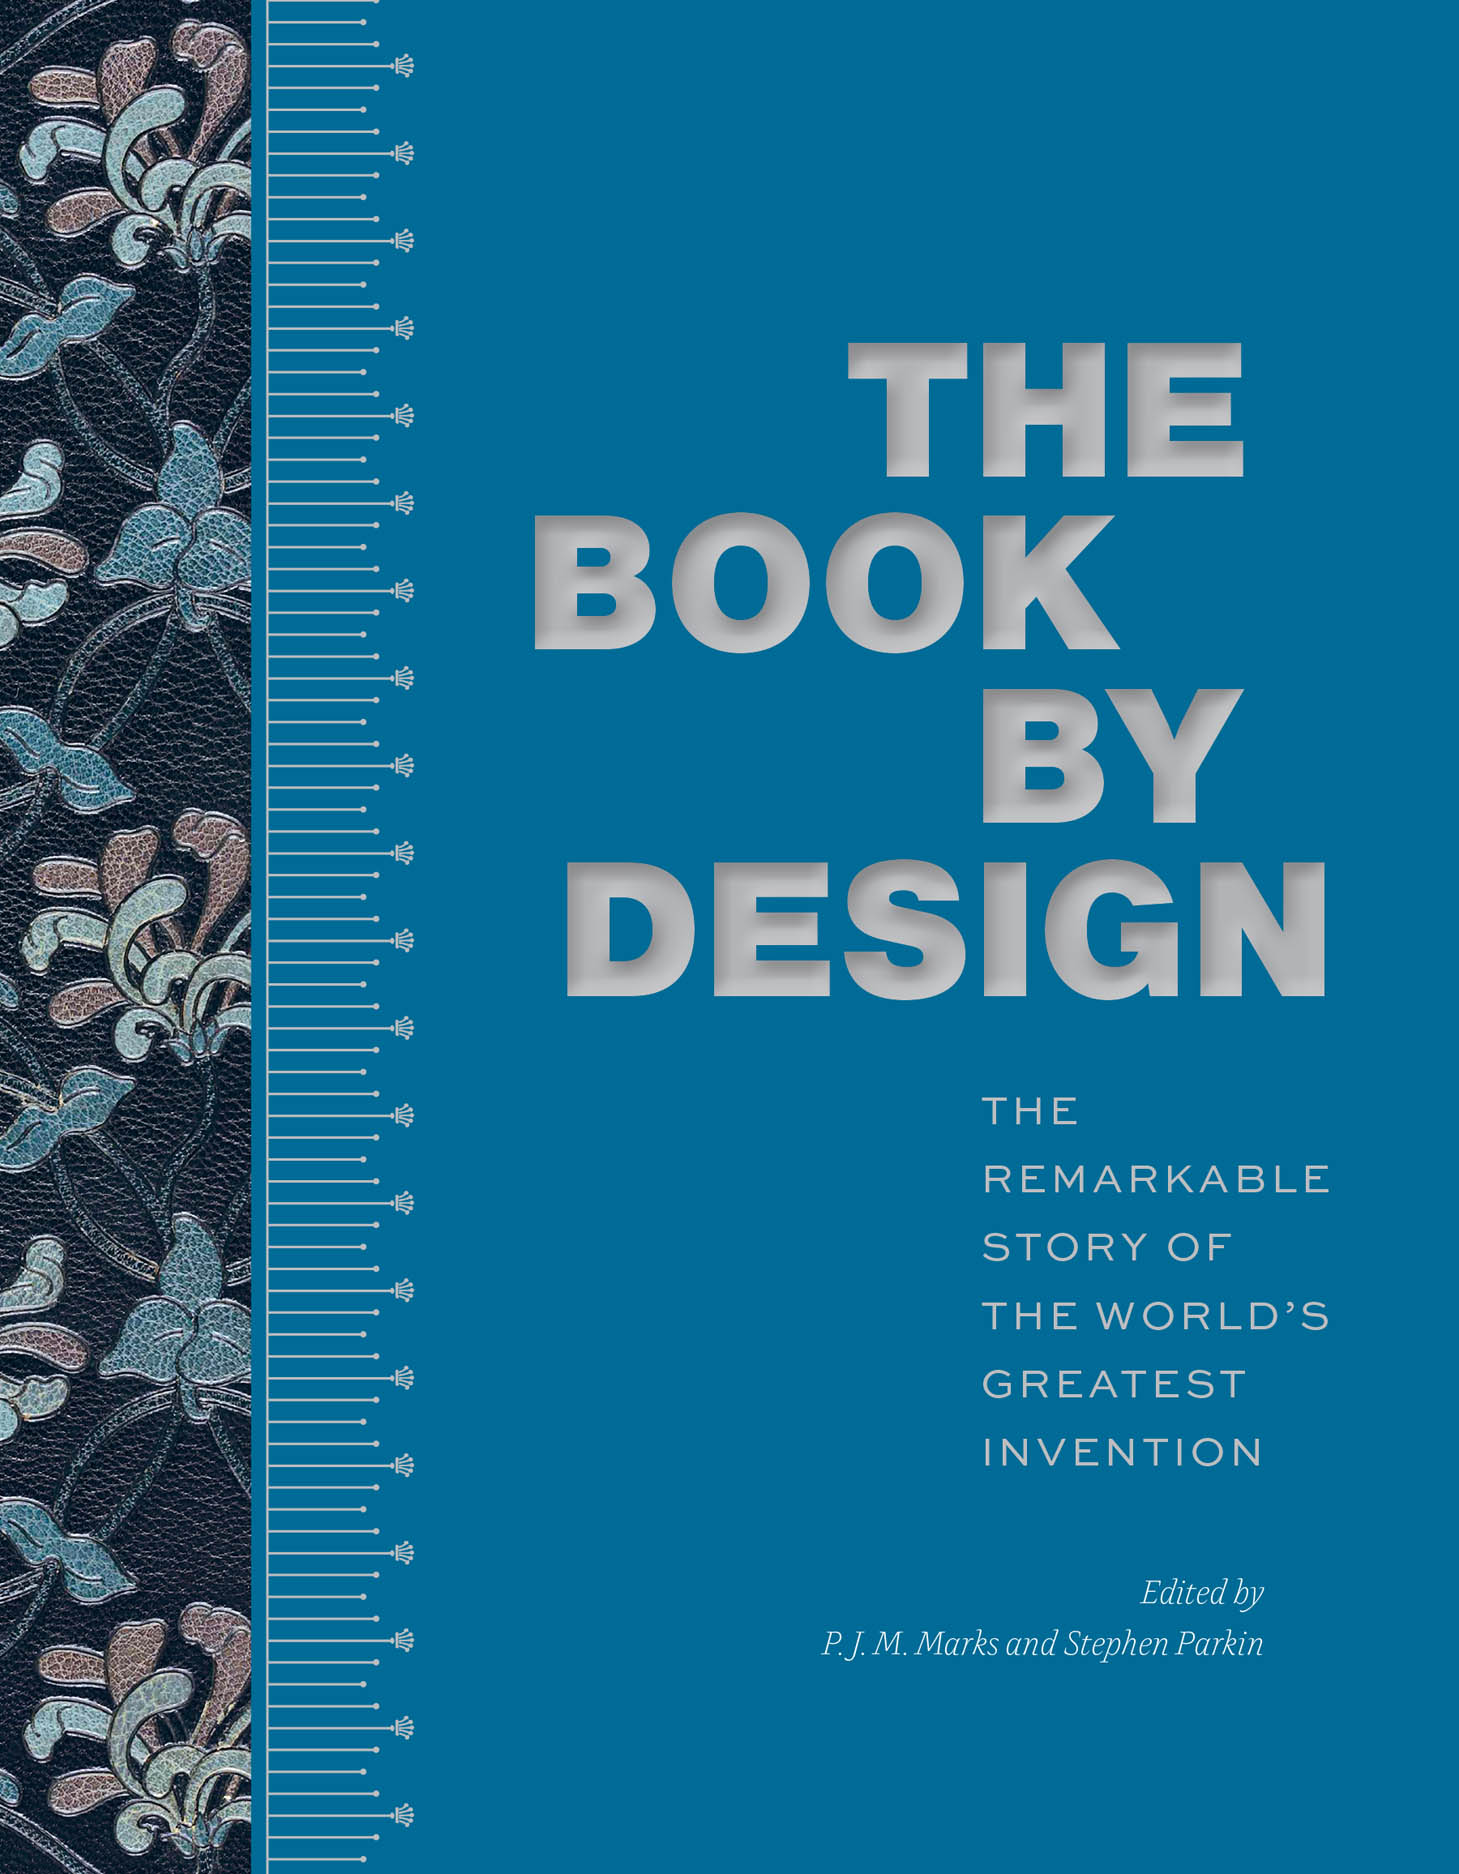 The Book by Design: The Remarkable Story of the World's Greatest